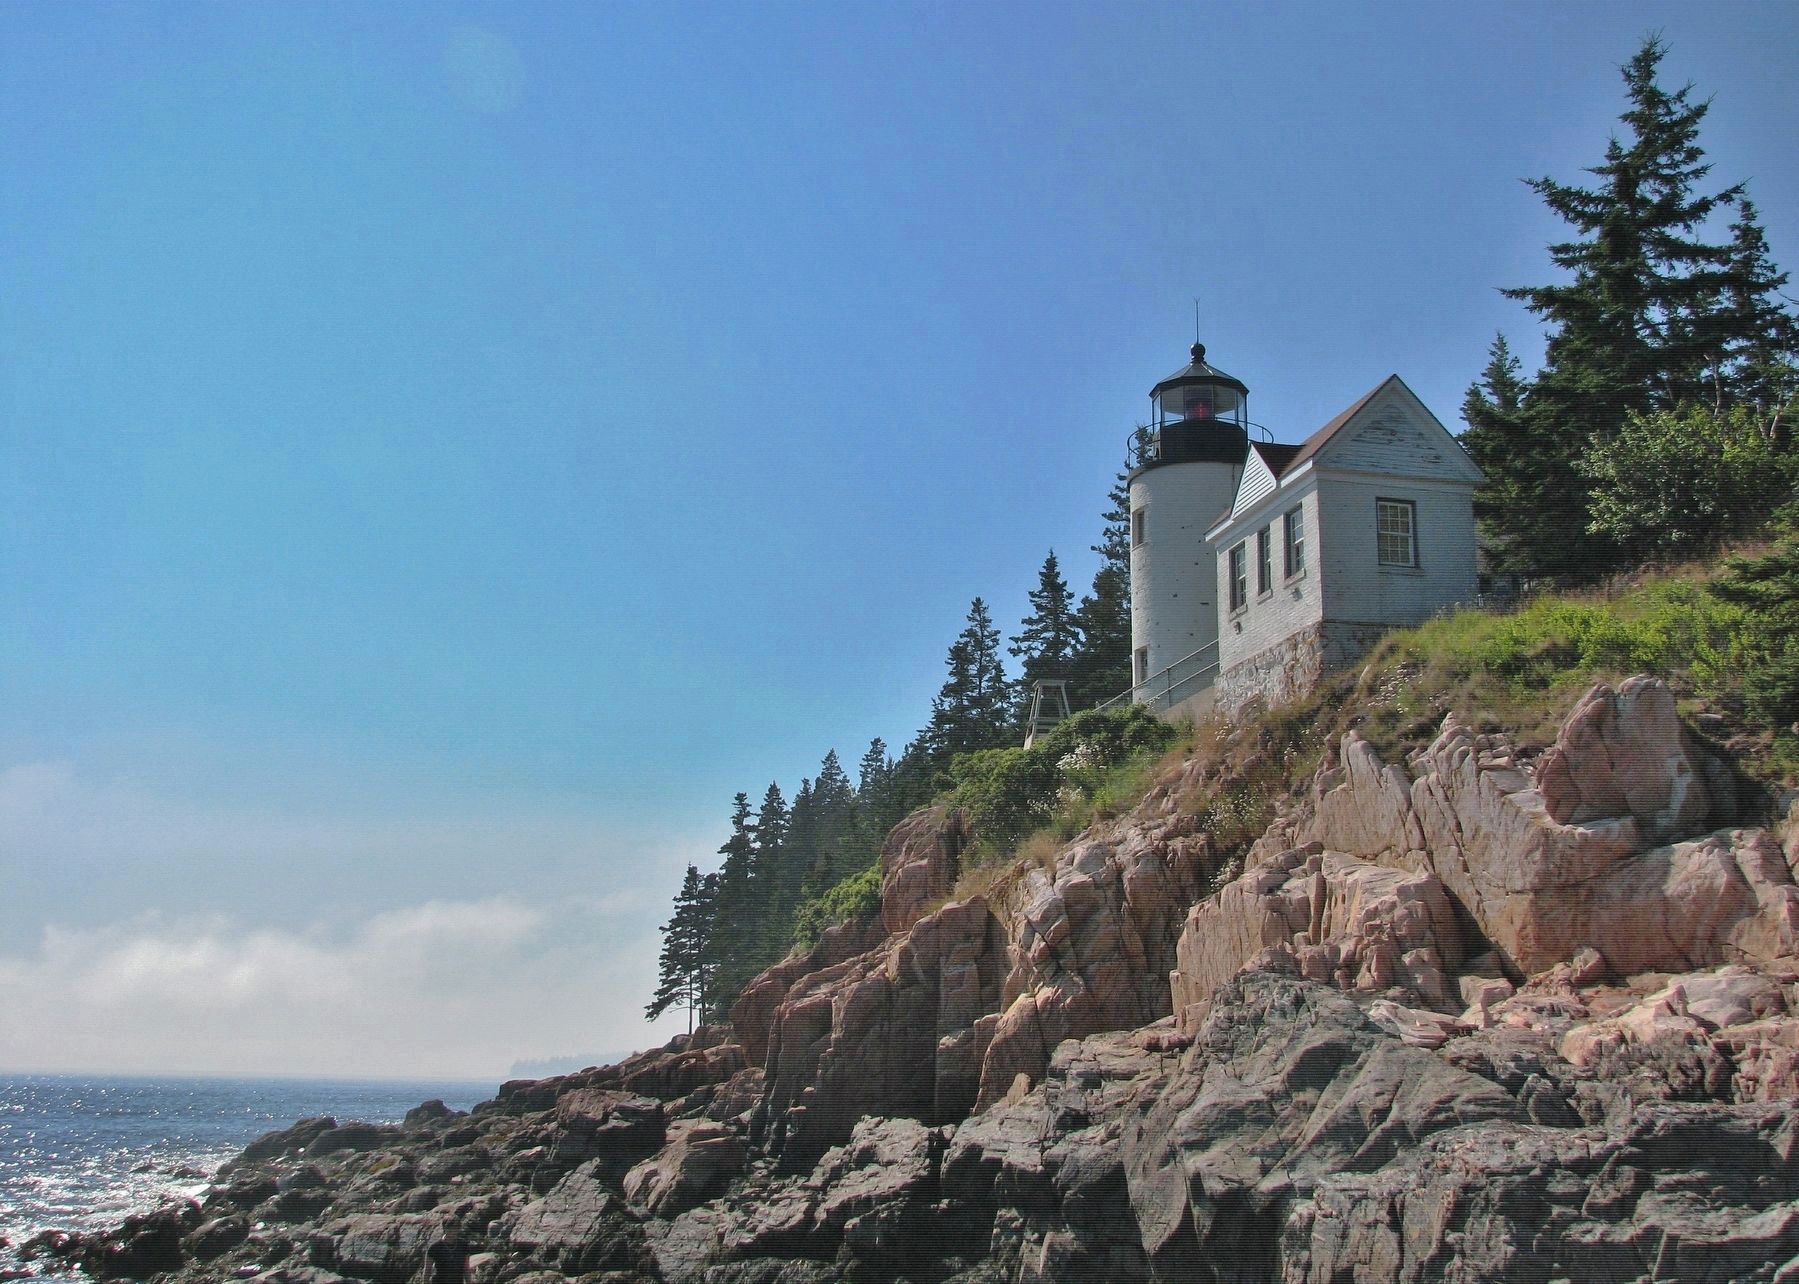 Bass Harbor Head Light Station (<i><b>view from shore below</i></b>) image. Click for full size.